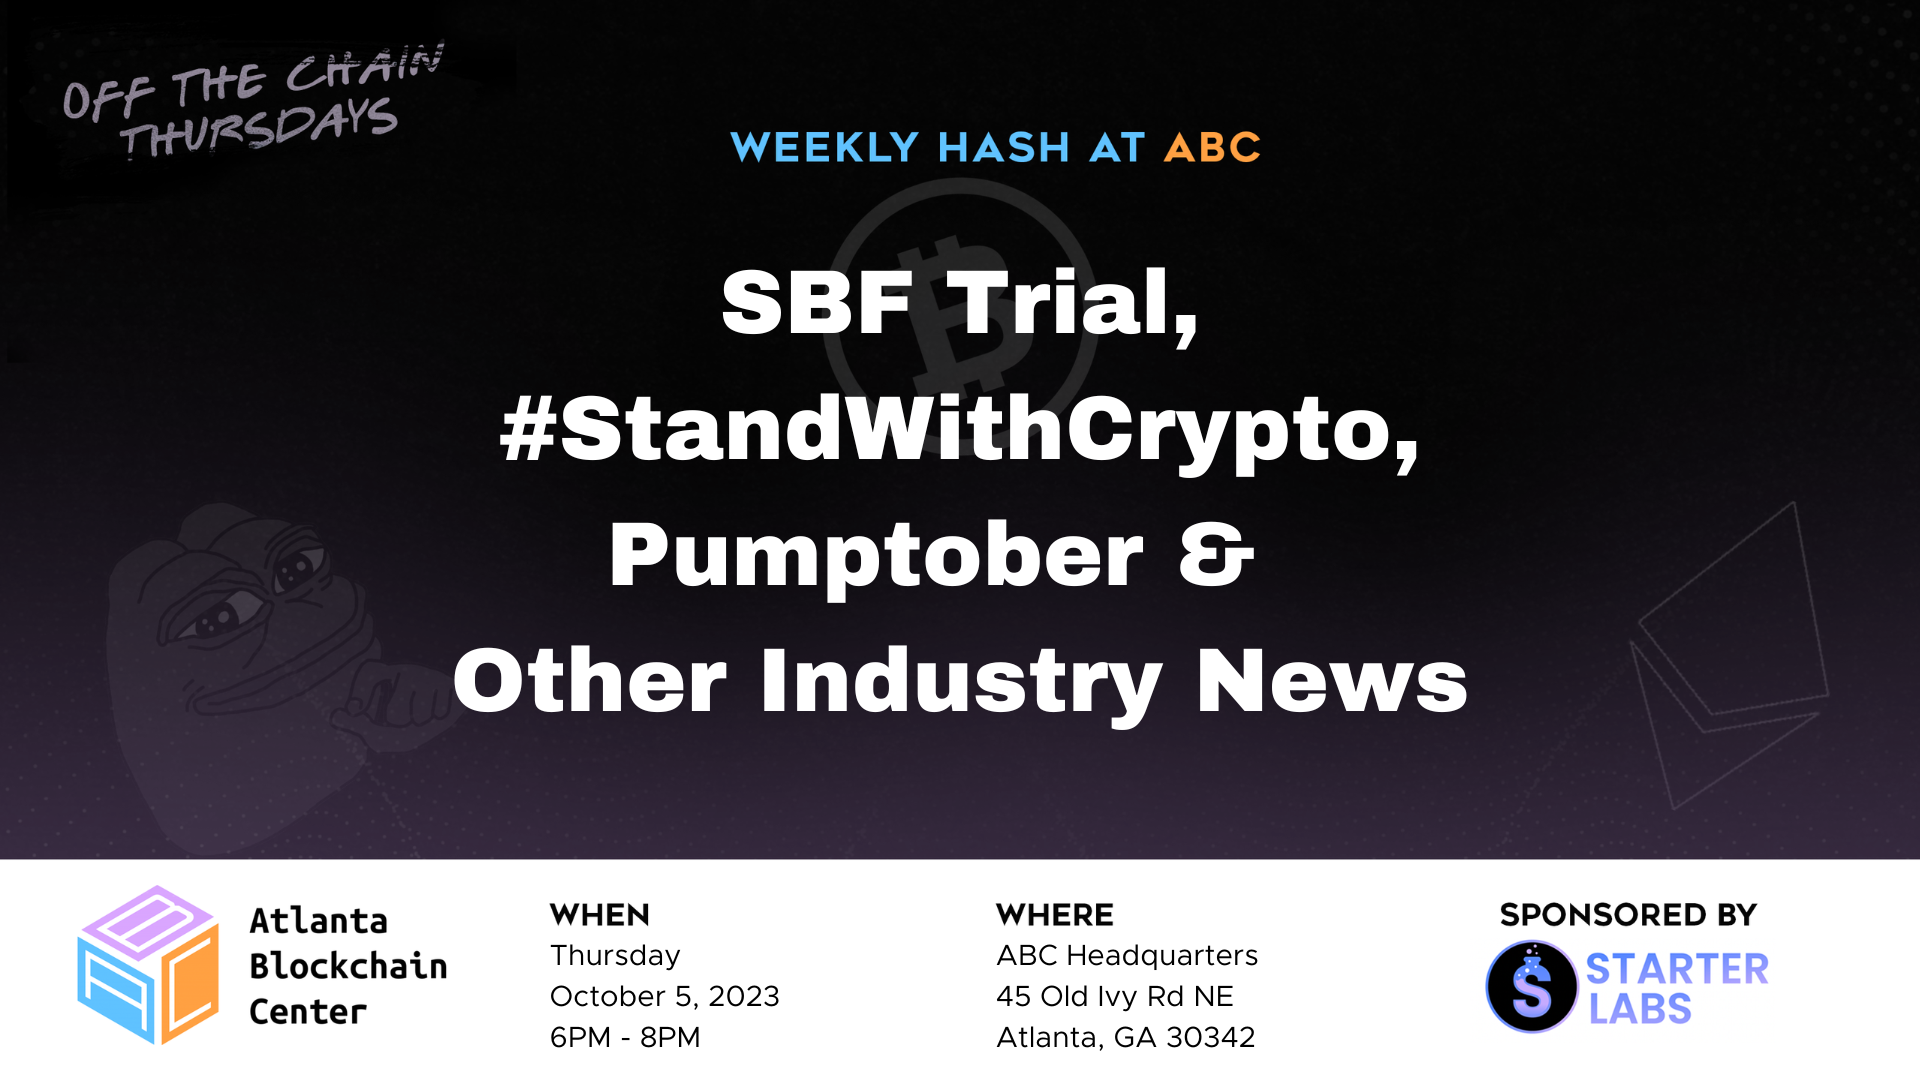 Weekly Hash at ABC – SBF Trial, #StandWithCrypto, Pumptober & Other Industry News